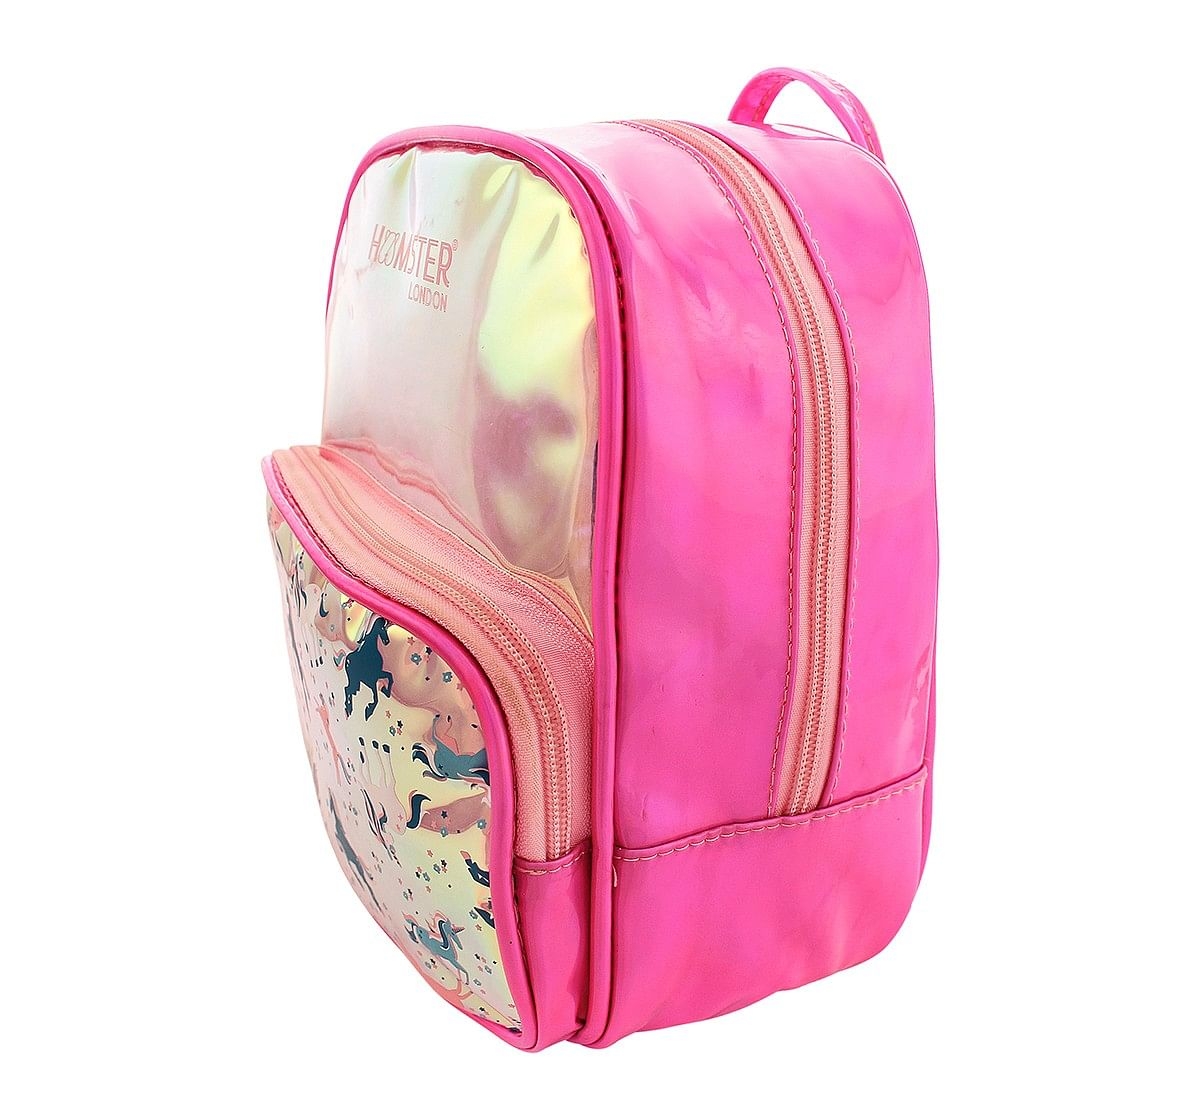 Hamster London Small Unicorn Backpack for age 3Y+ (Pink)